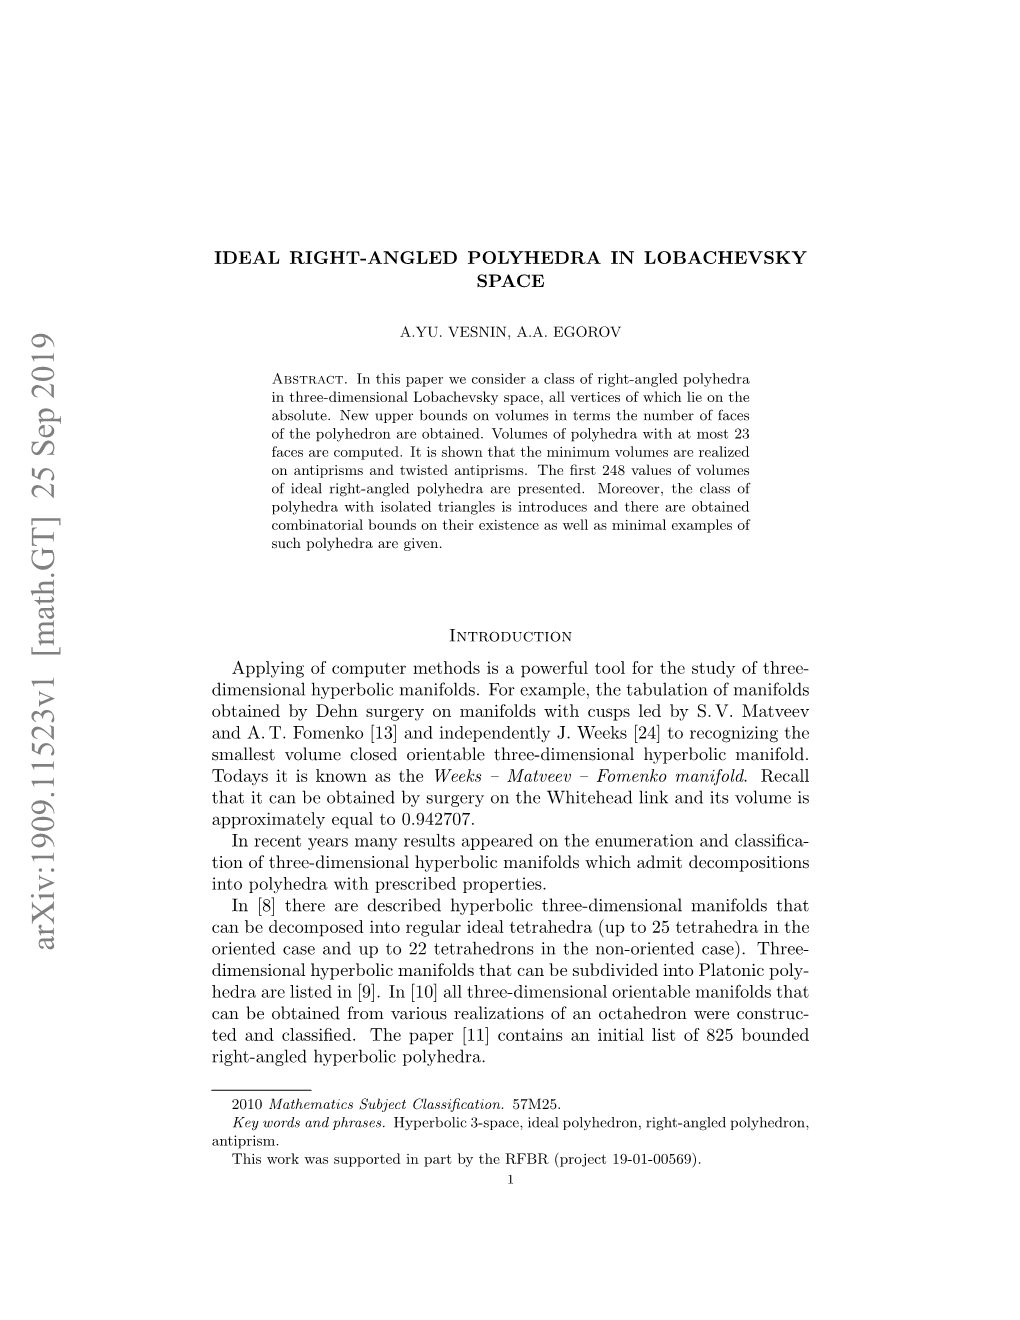 Arxiv:1909.11523V1 [Math.GT] 25 Sep 2019 Oriented Case and up to 22 Tetrahedrons in the Non-Oriented Case)